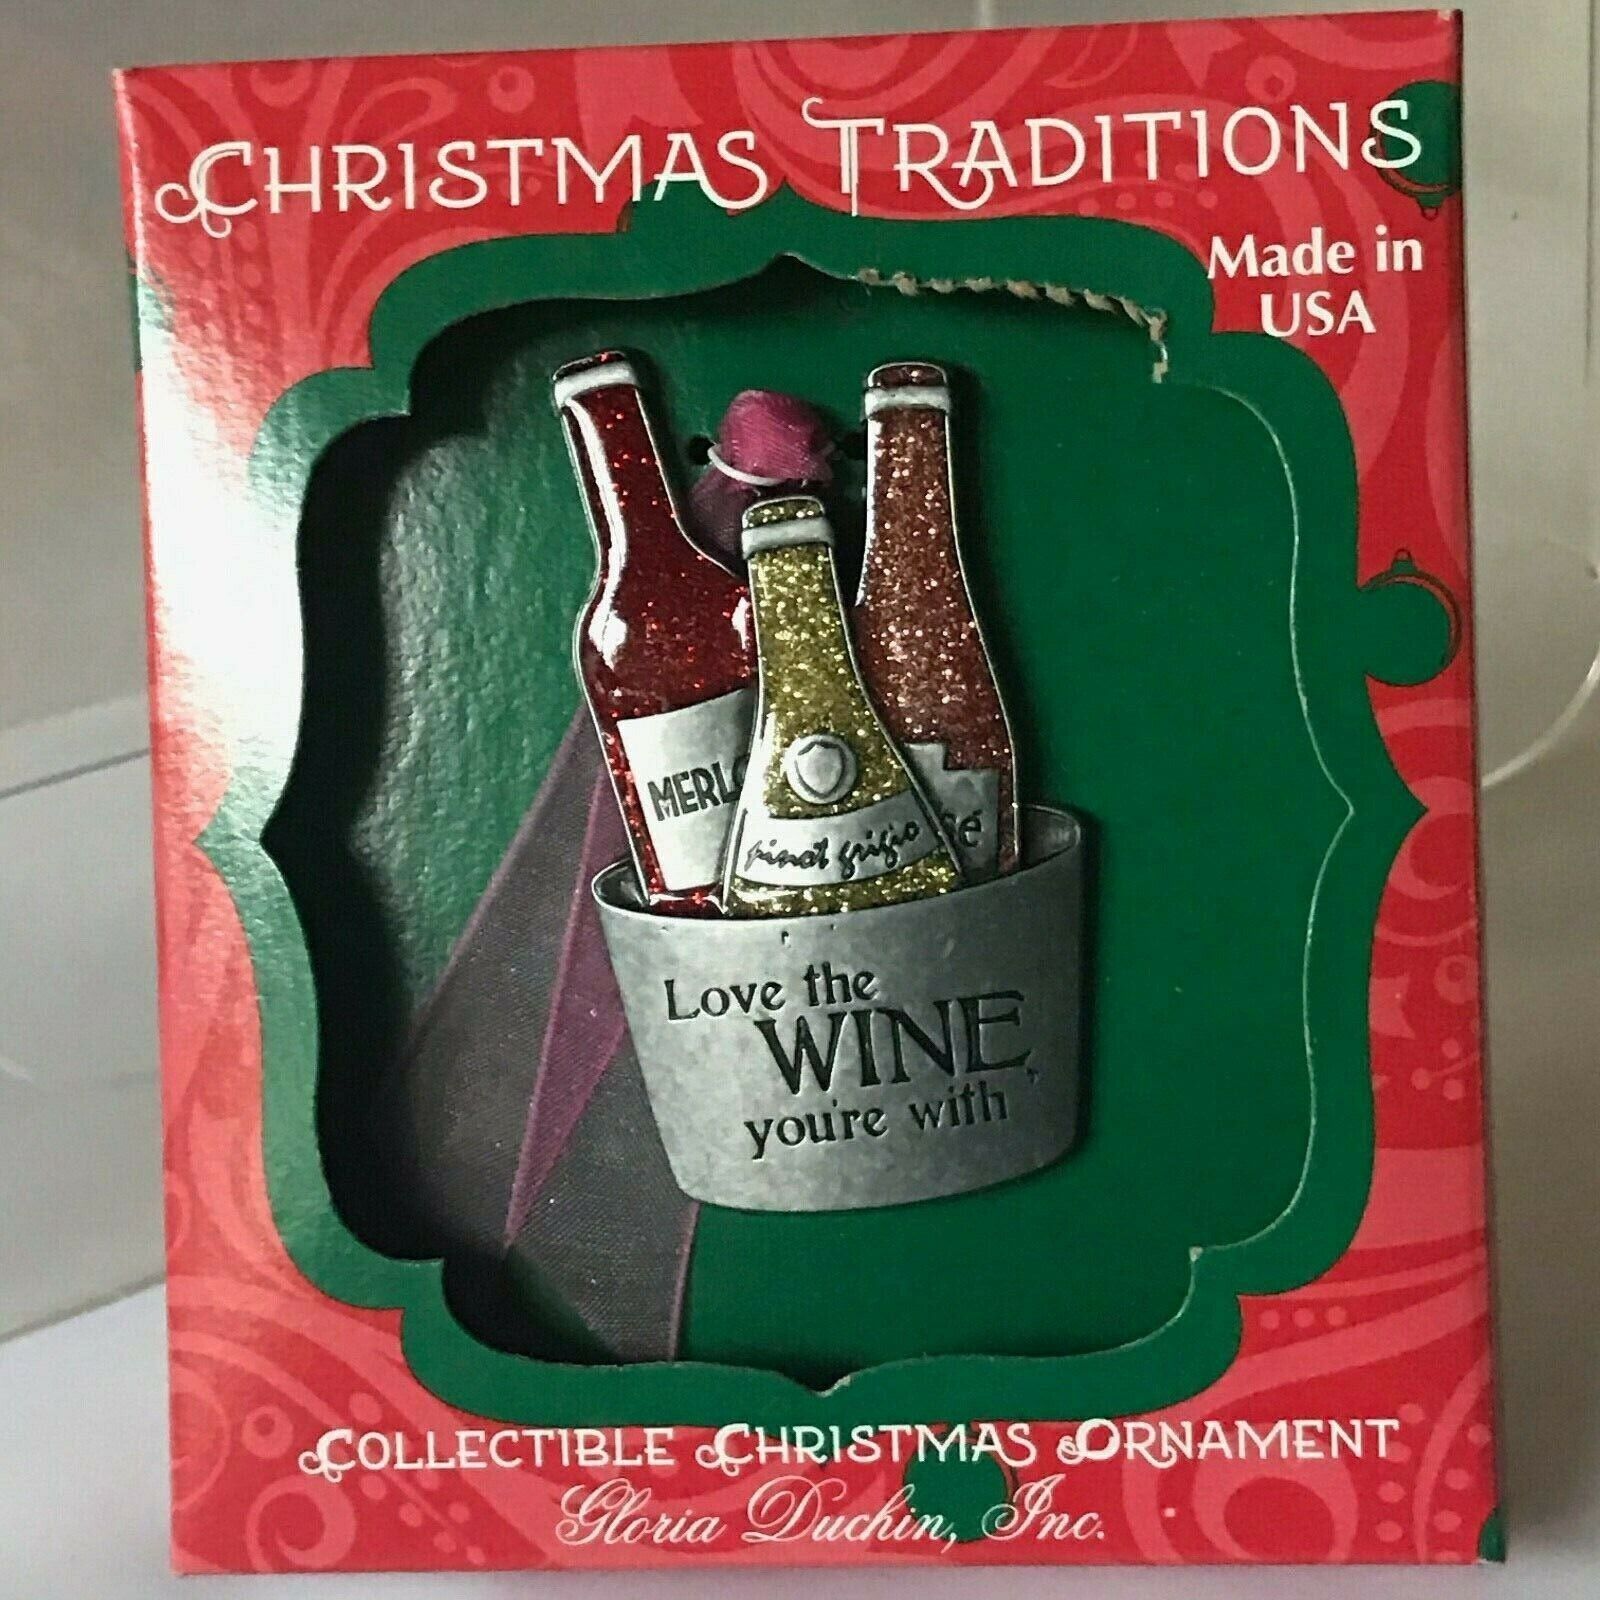 GLORIA DUCHIN~LOVE THE WINE YOU'RE WITH~ COLLECTIBLE CHRISTMAS ORNAMENT